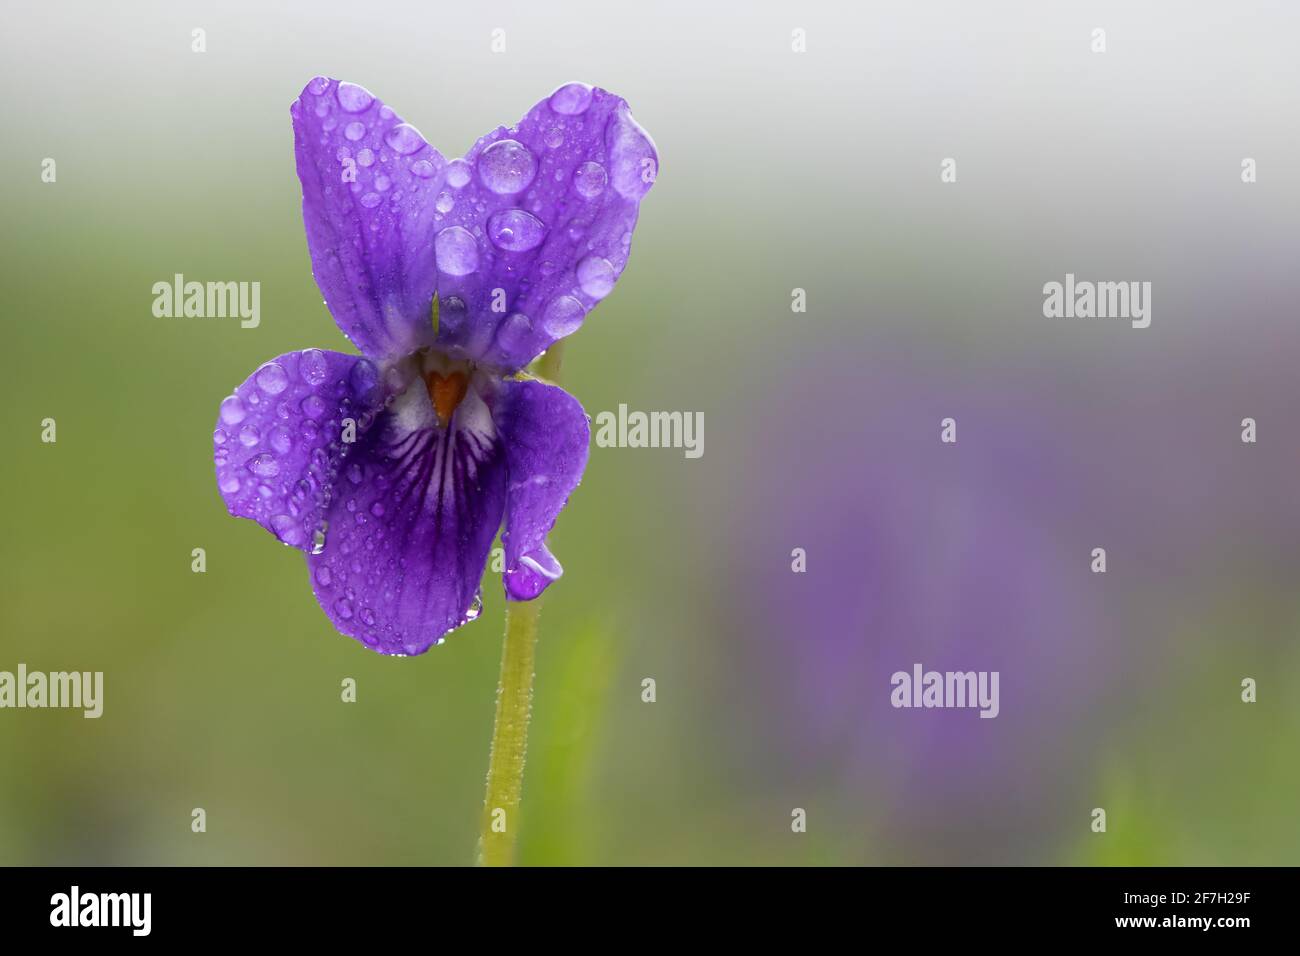 Macro shot of an English violet (viola odorata) flower covered in dew droplets Stock Photo